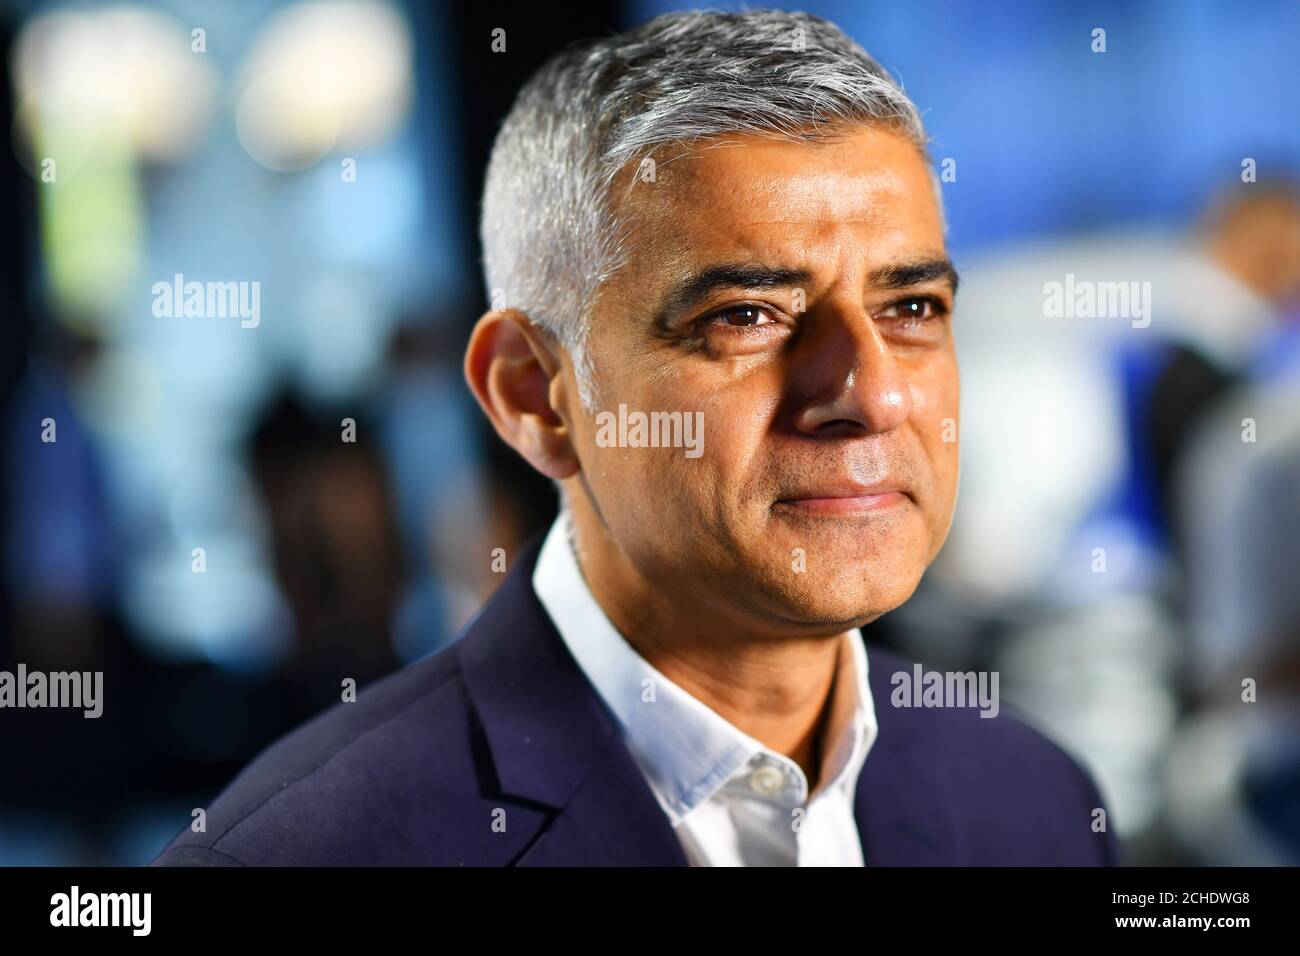 Mayor of London Sadiq Khan poses during an interview with Reuters at an event to promote the start of London Tech Week, in London, Britain, June 10, 2019.  REUTERS/Dylan Martinez Stock Photo